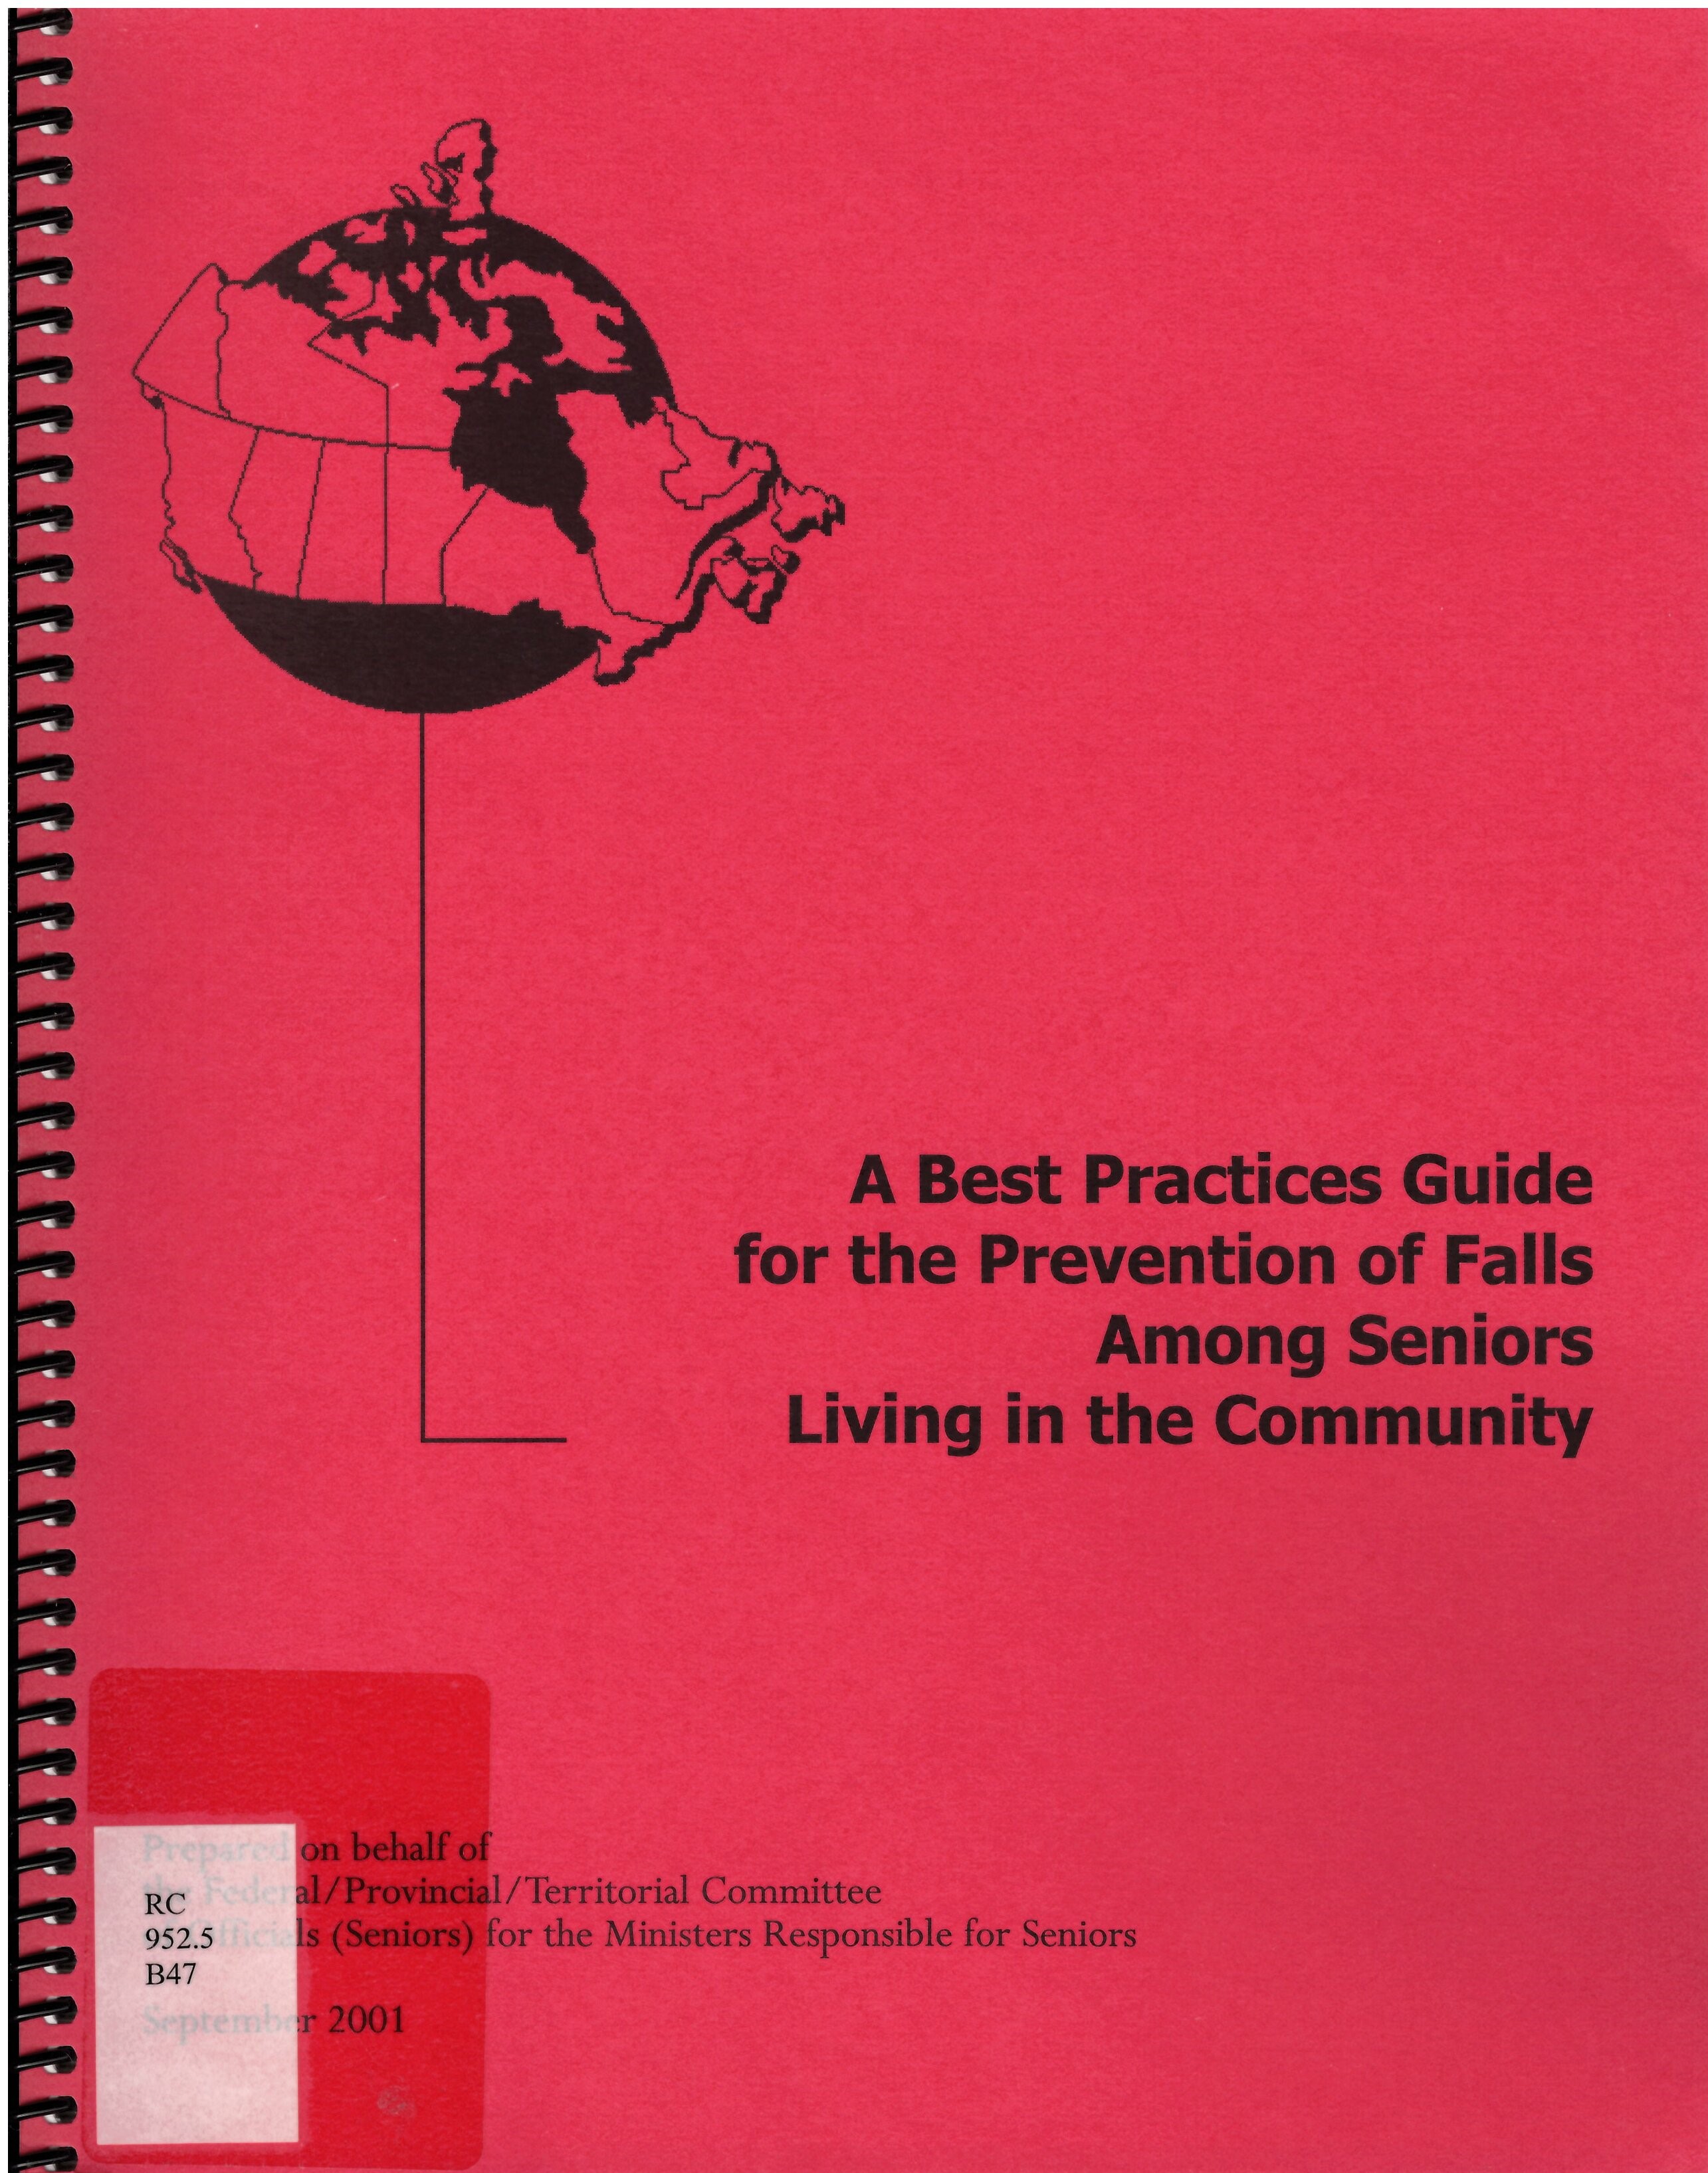 A best practices guide for the prevention of falls among seniors living in the community